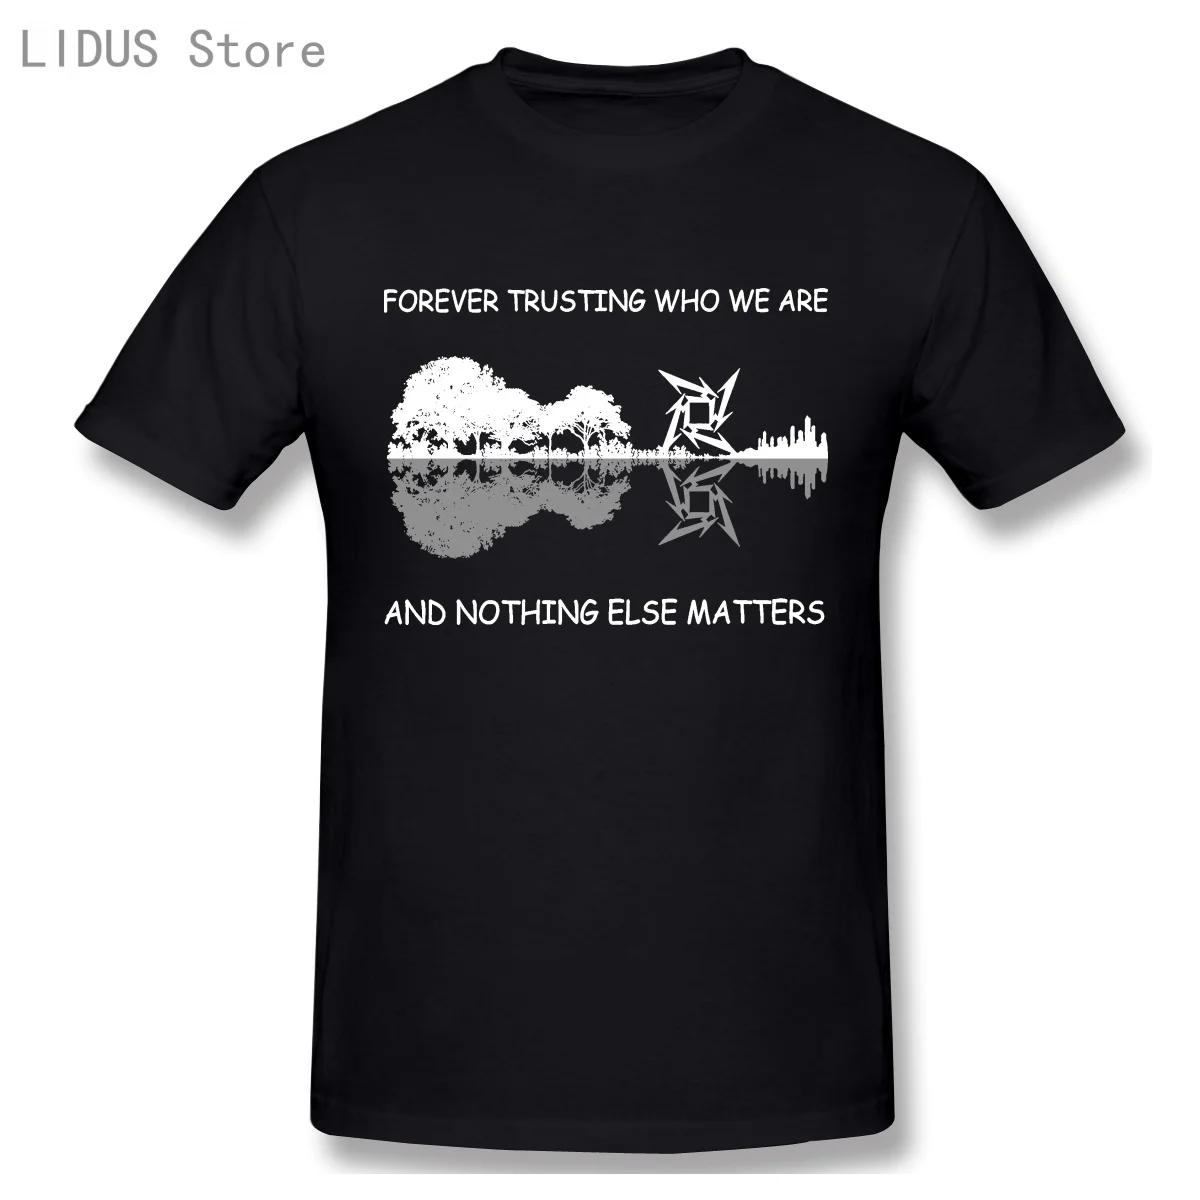 

LIDUS Forever Trusting Who We Are And Nothing Else Matters Funny T Shirt Guitar Lake Shadow Art Shirt Fashion Cotton Tshirt